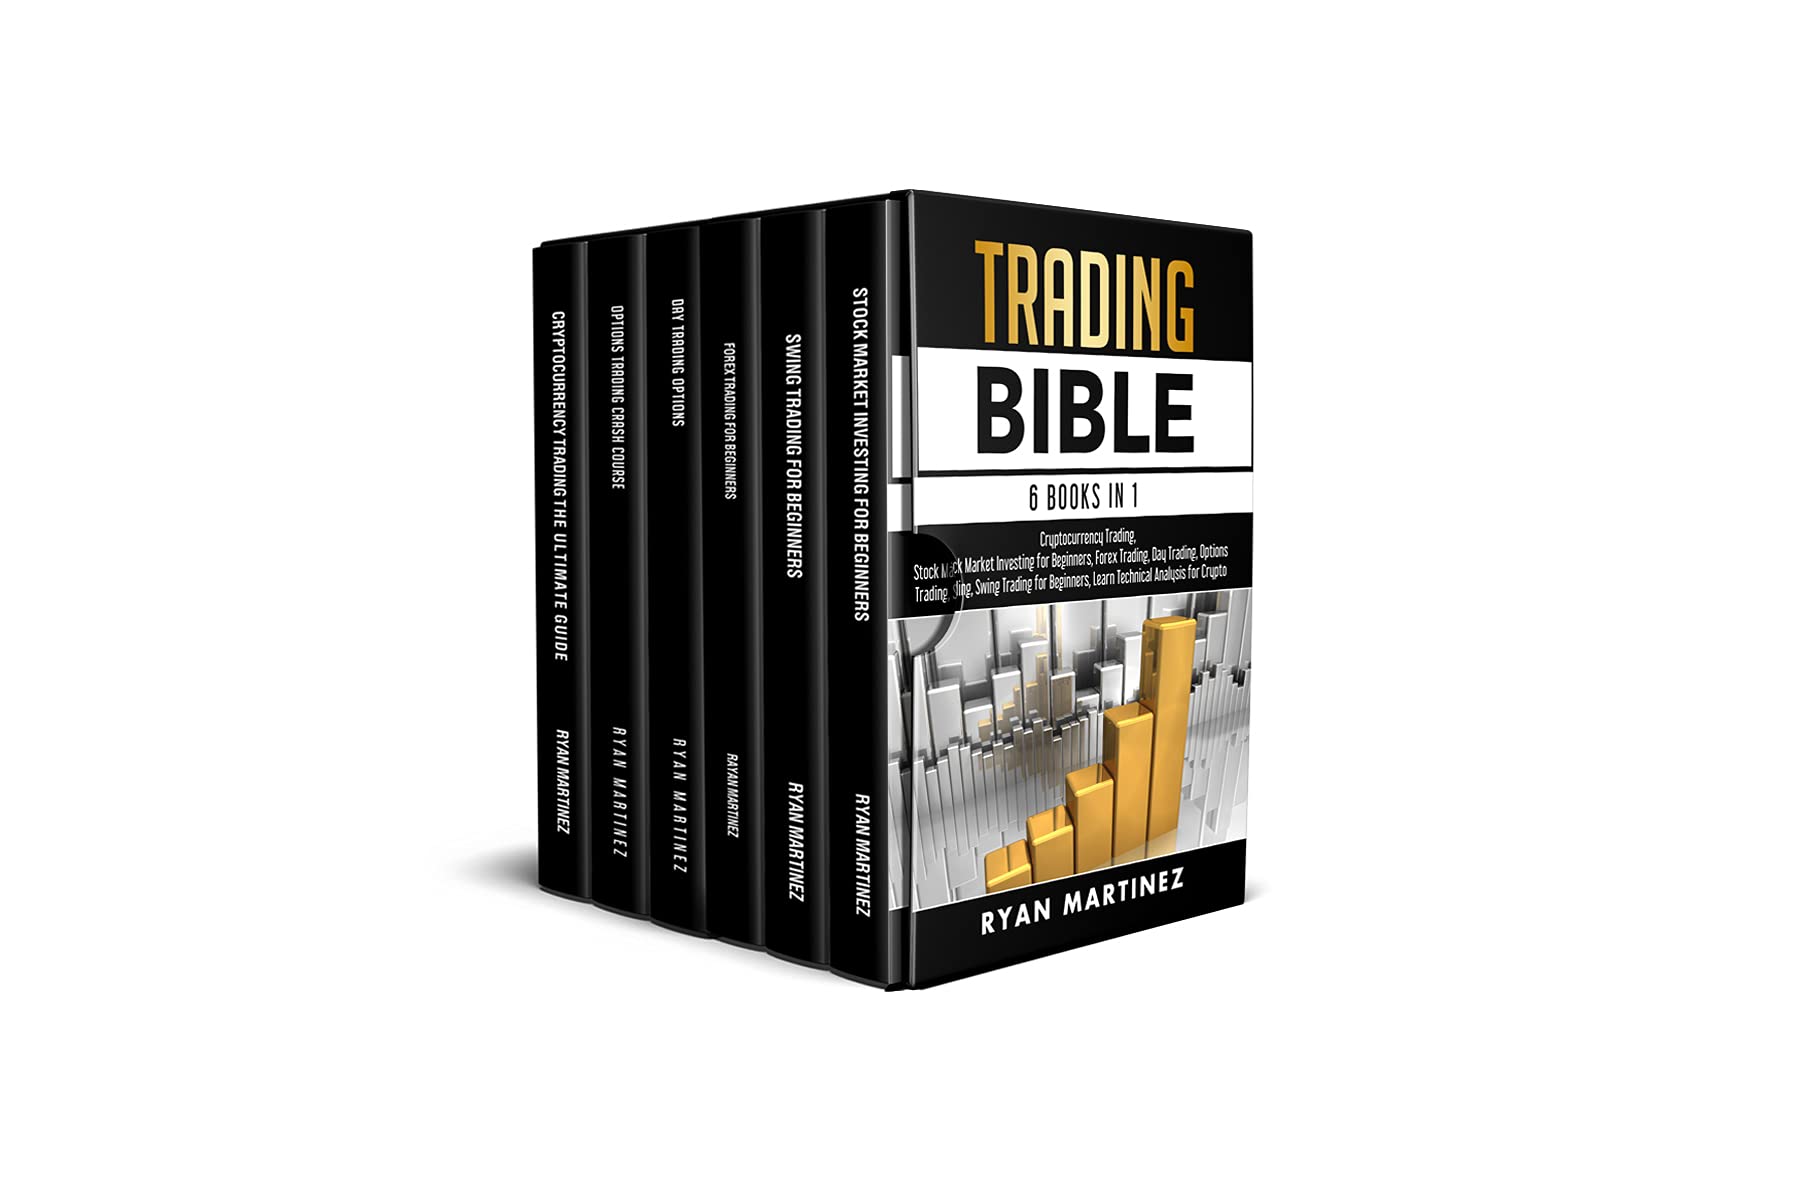 What Does The Bible Say About Trading Stocks